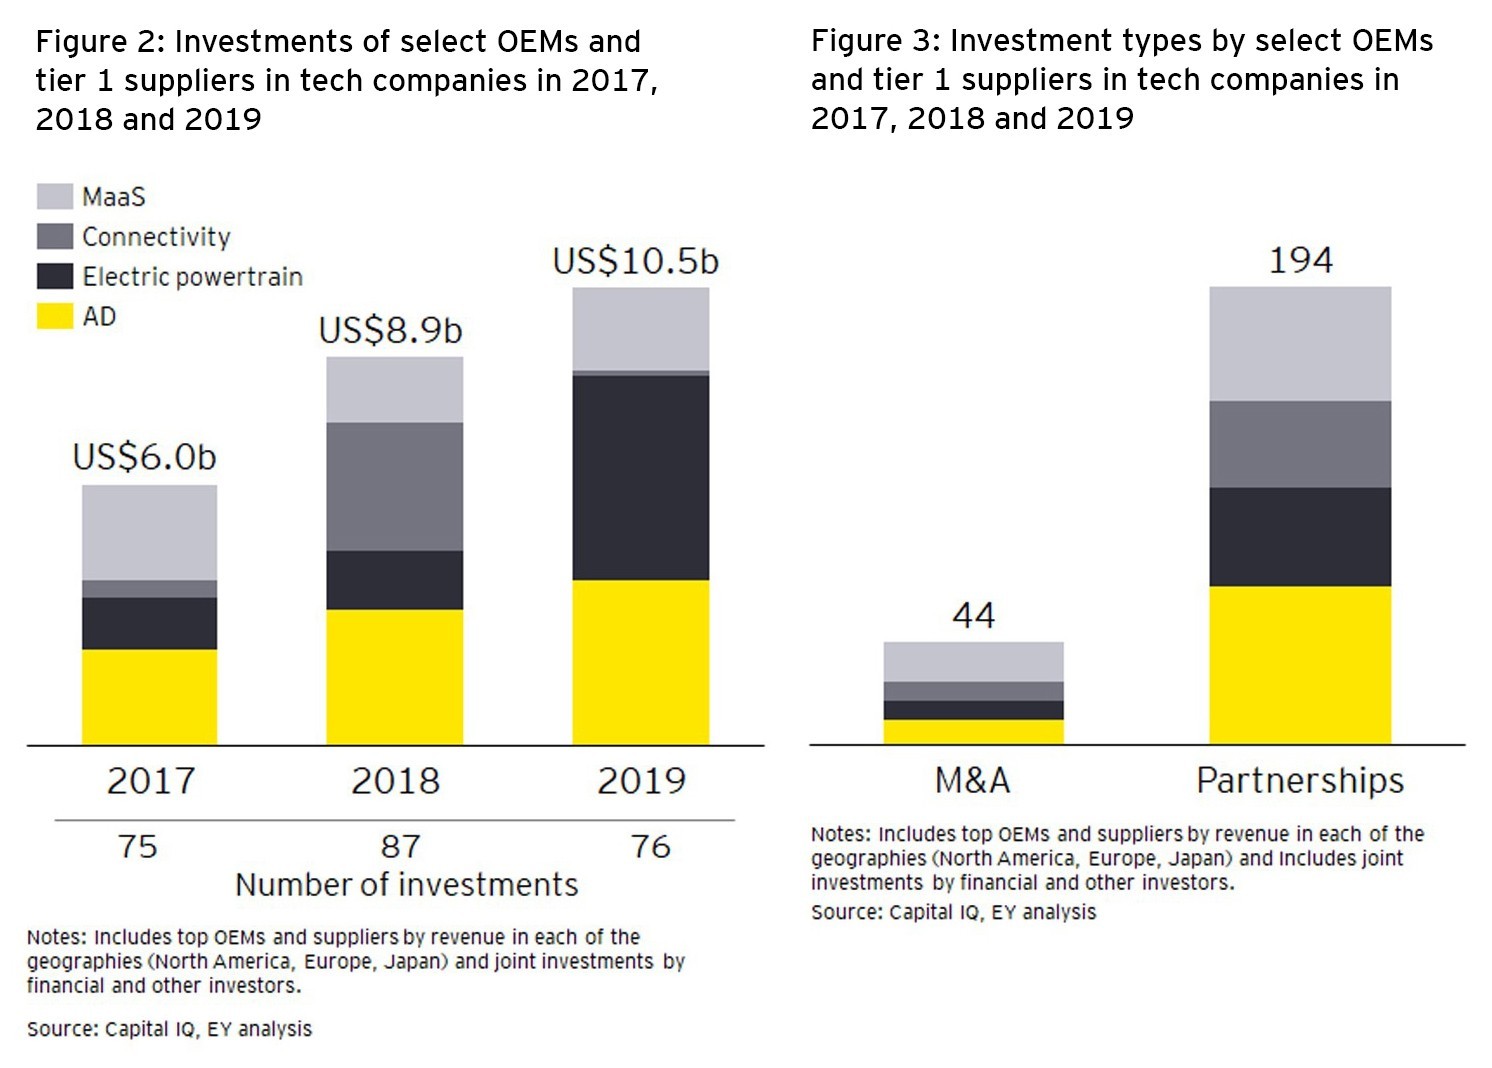 Investments of select OEMs and tier 1 suppliers in tech companies in 2017, 2018 and 2019